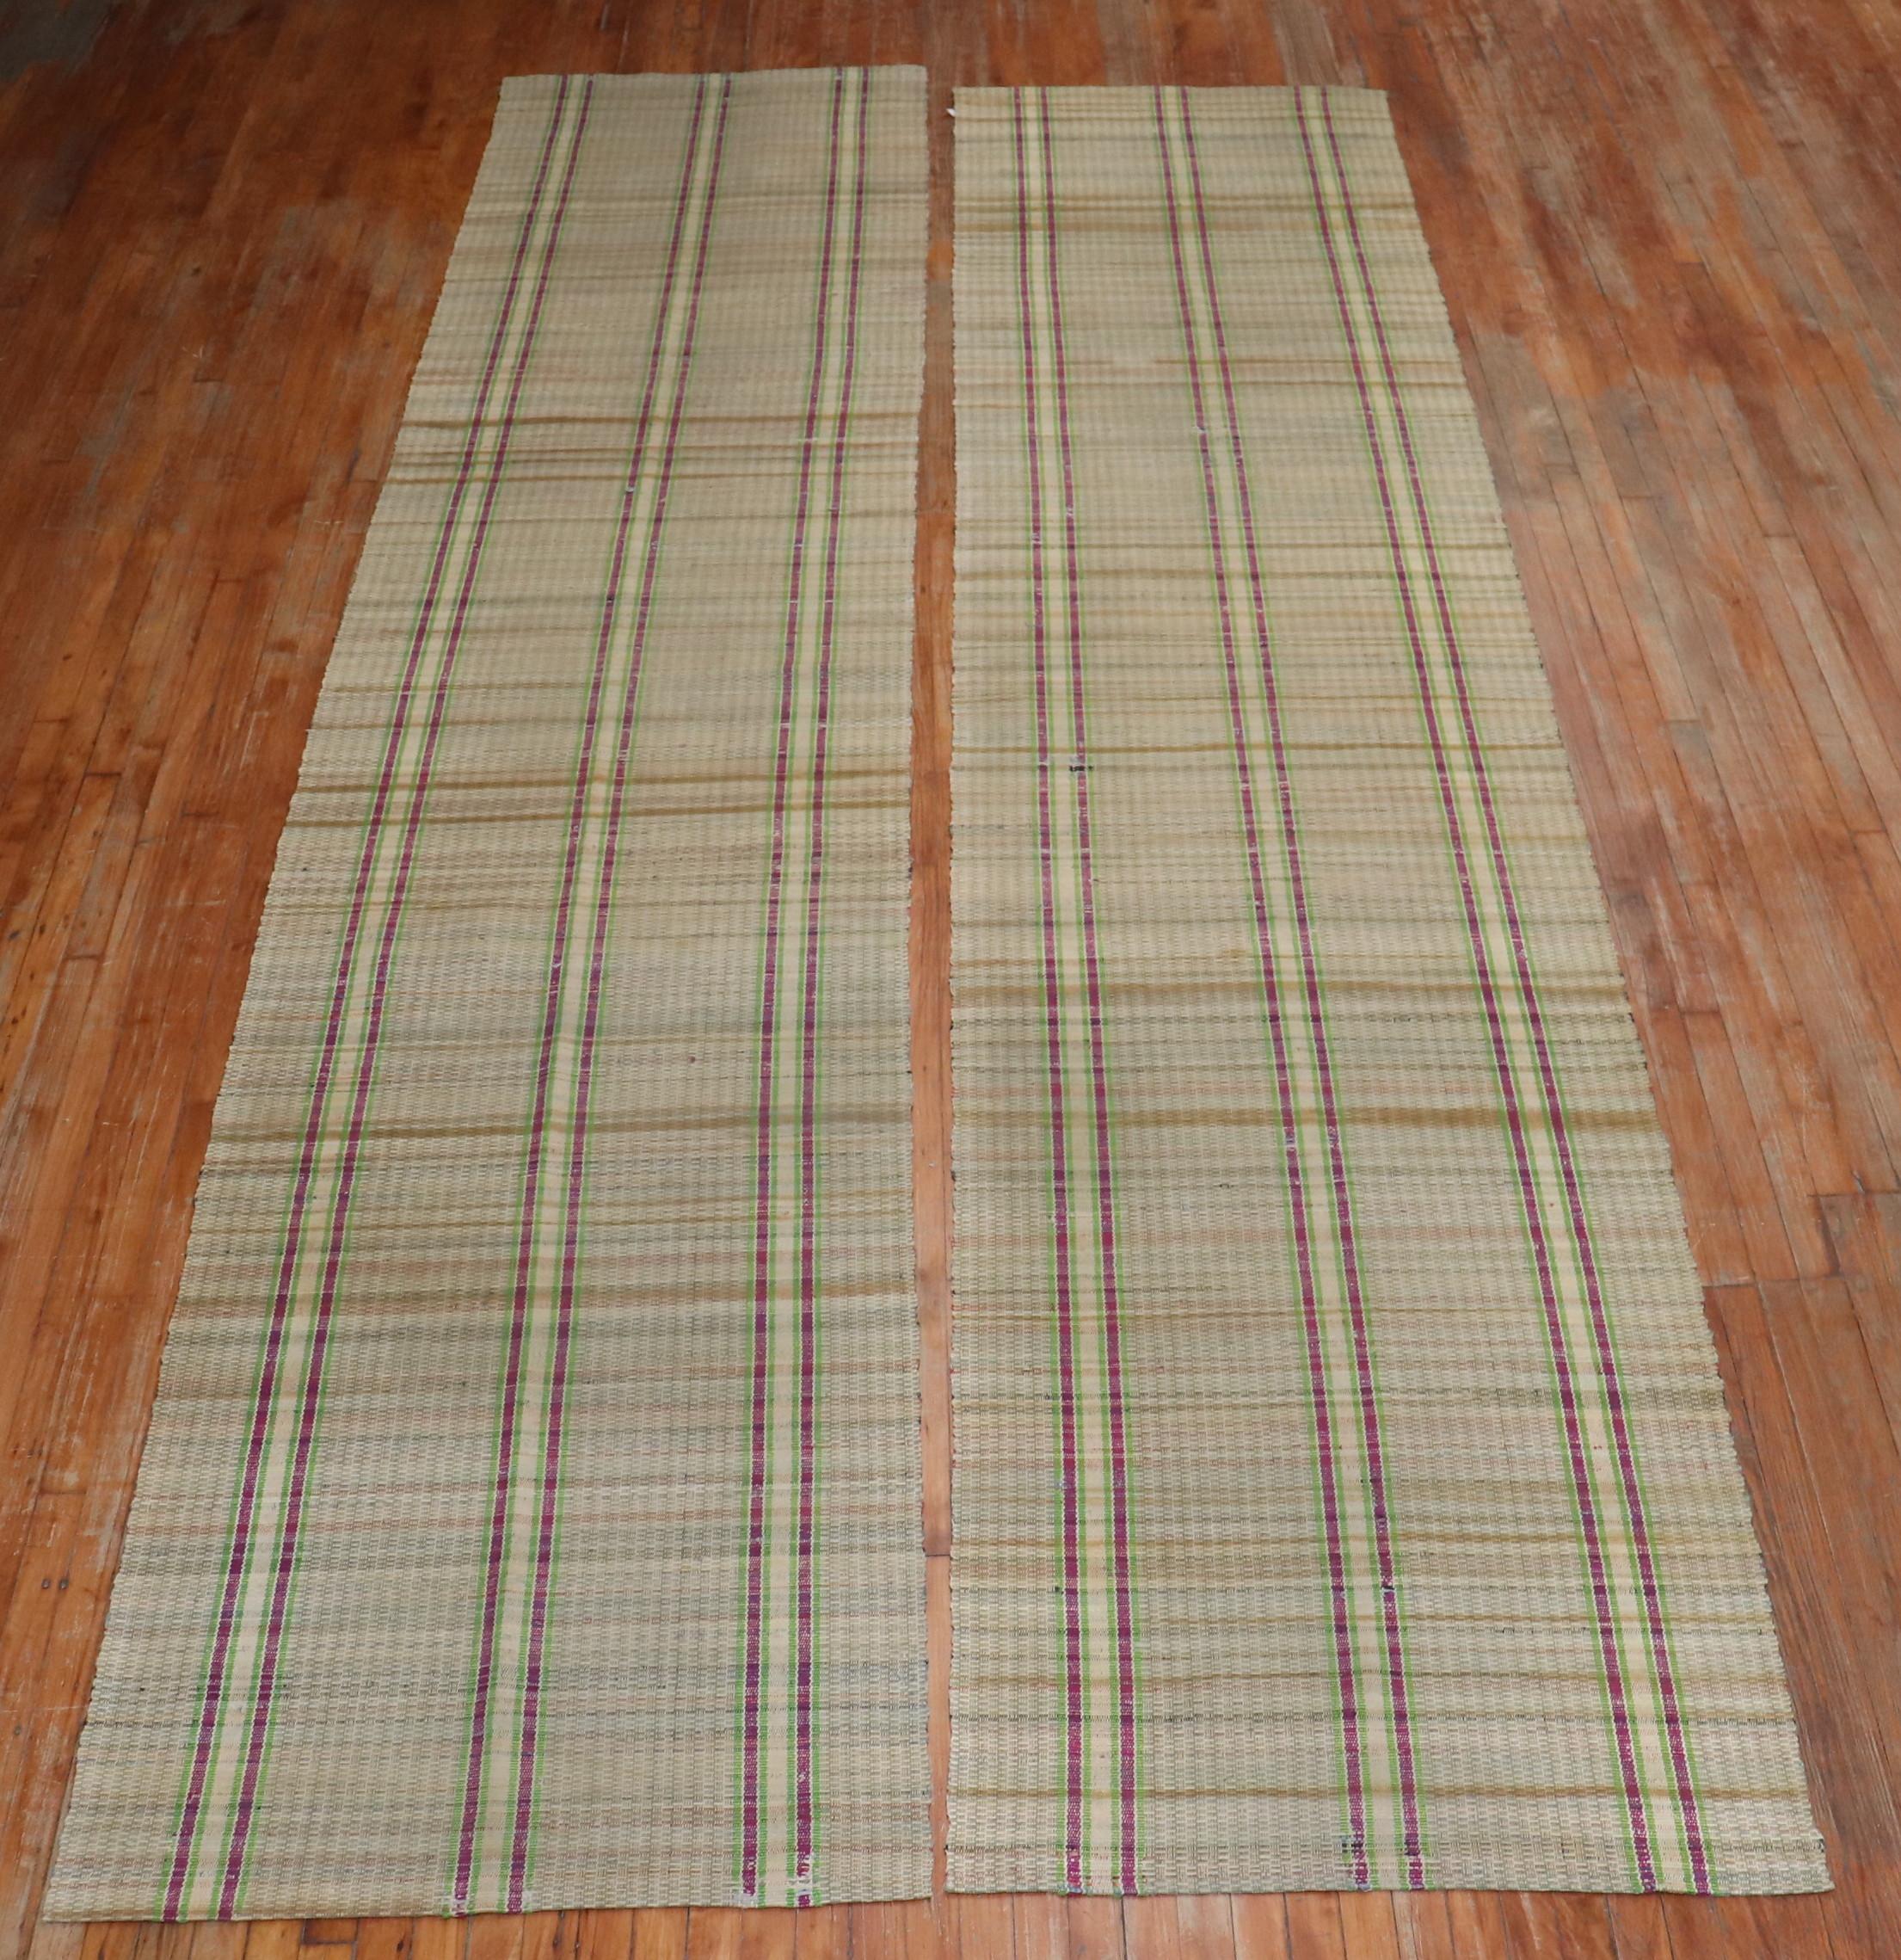 A rare matching set of rag rug runners containing a plaid motif on a straw colored ground from the mid-20th century

Measuring: 3'2